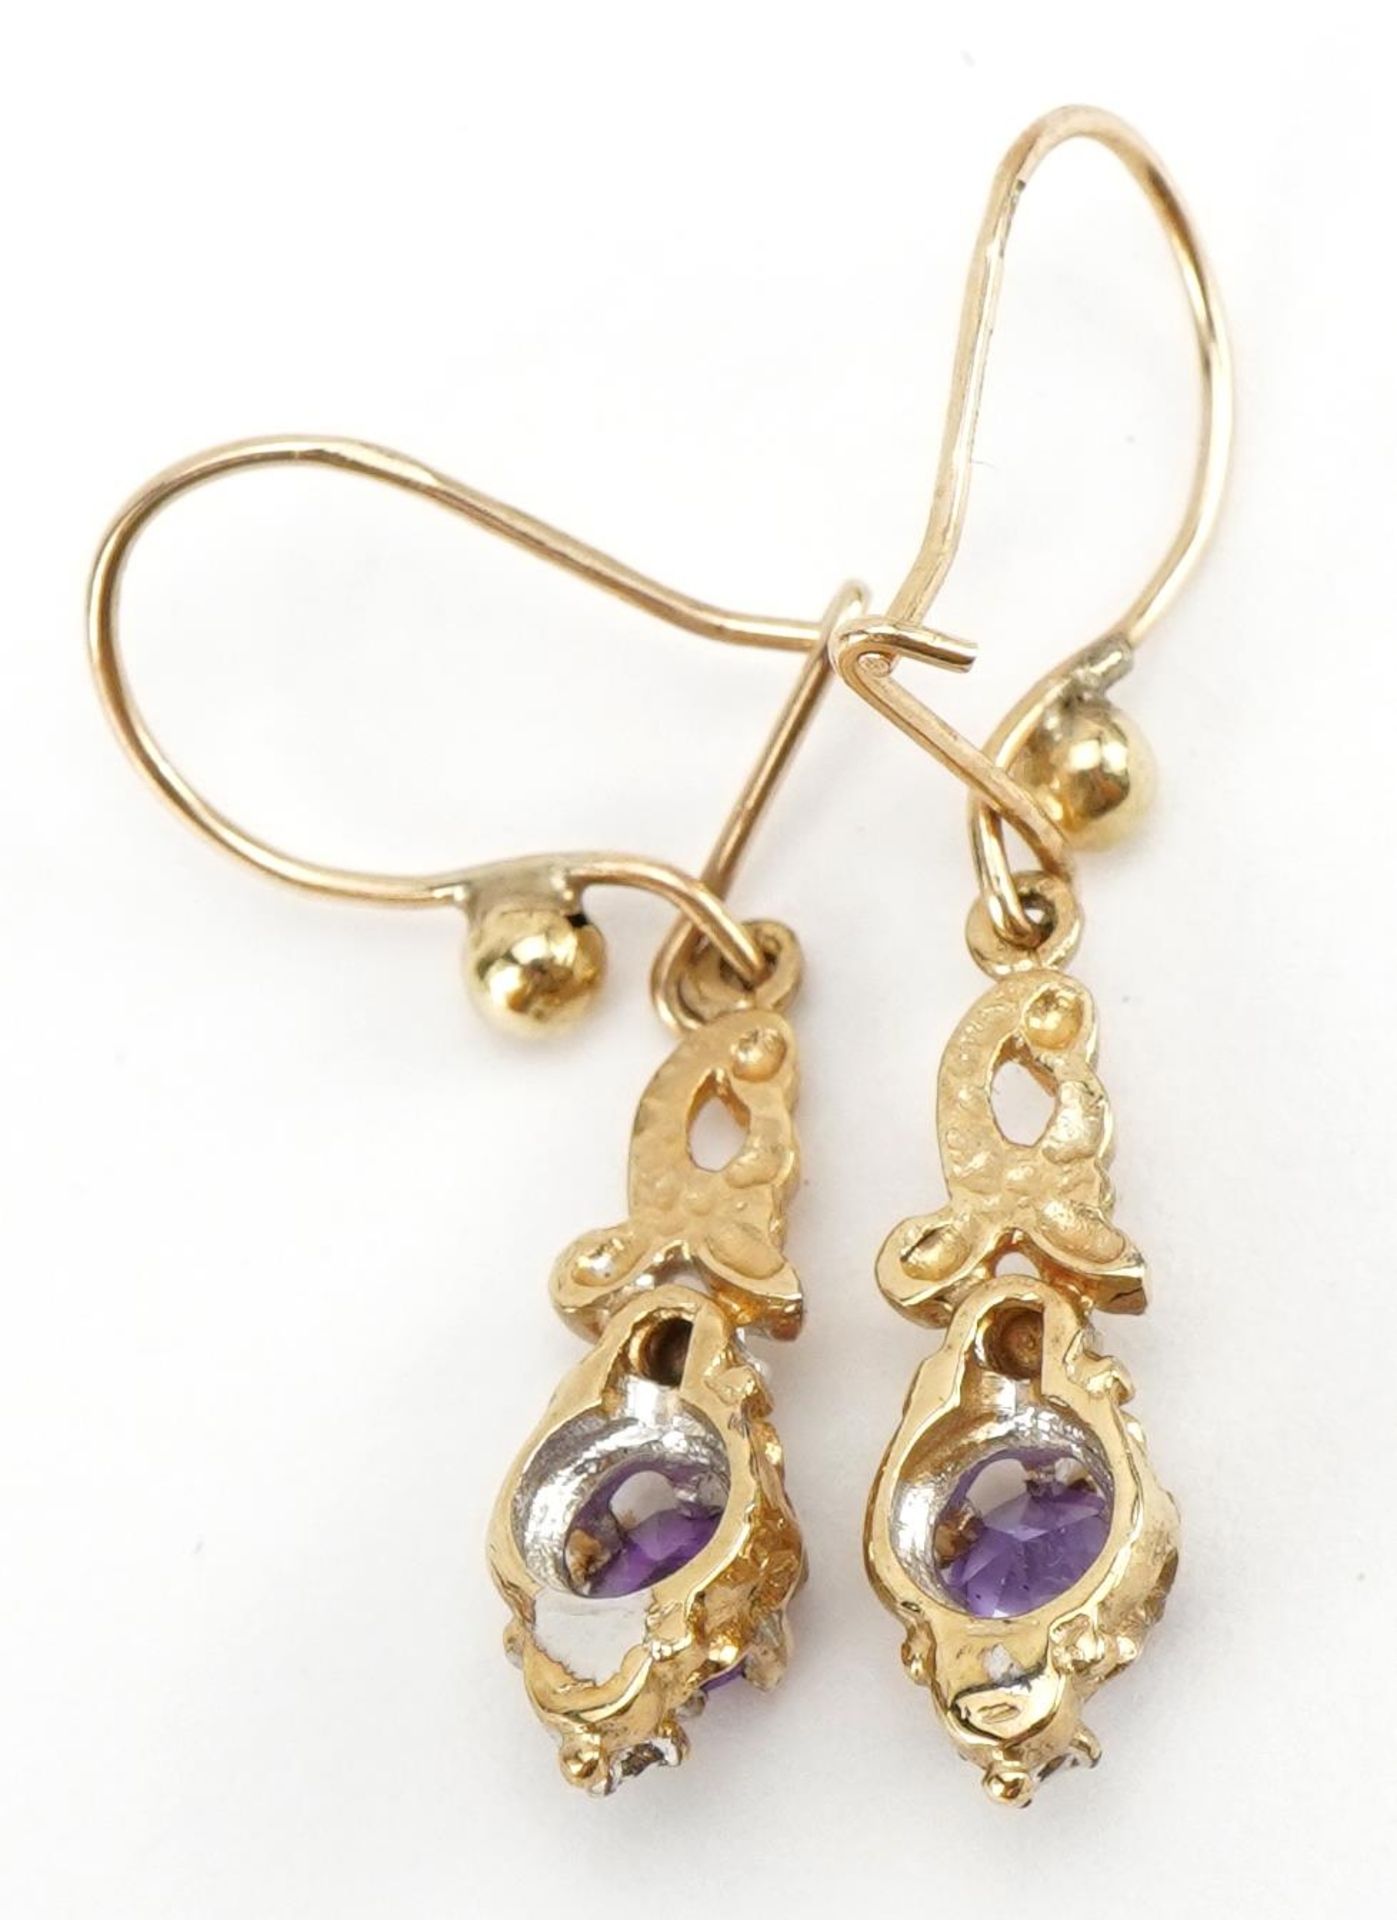 Pair of 9ct gold amethyst and diamond drop earrings, 2.1cm high, 1.9g - Image 2 of 2